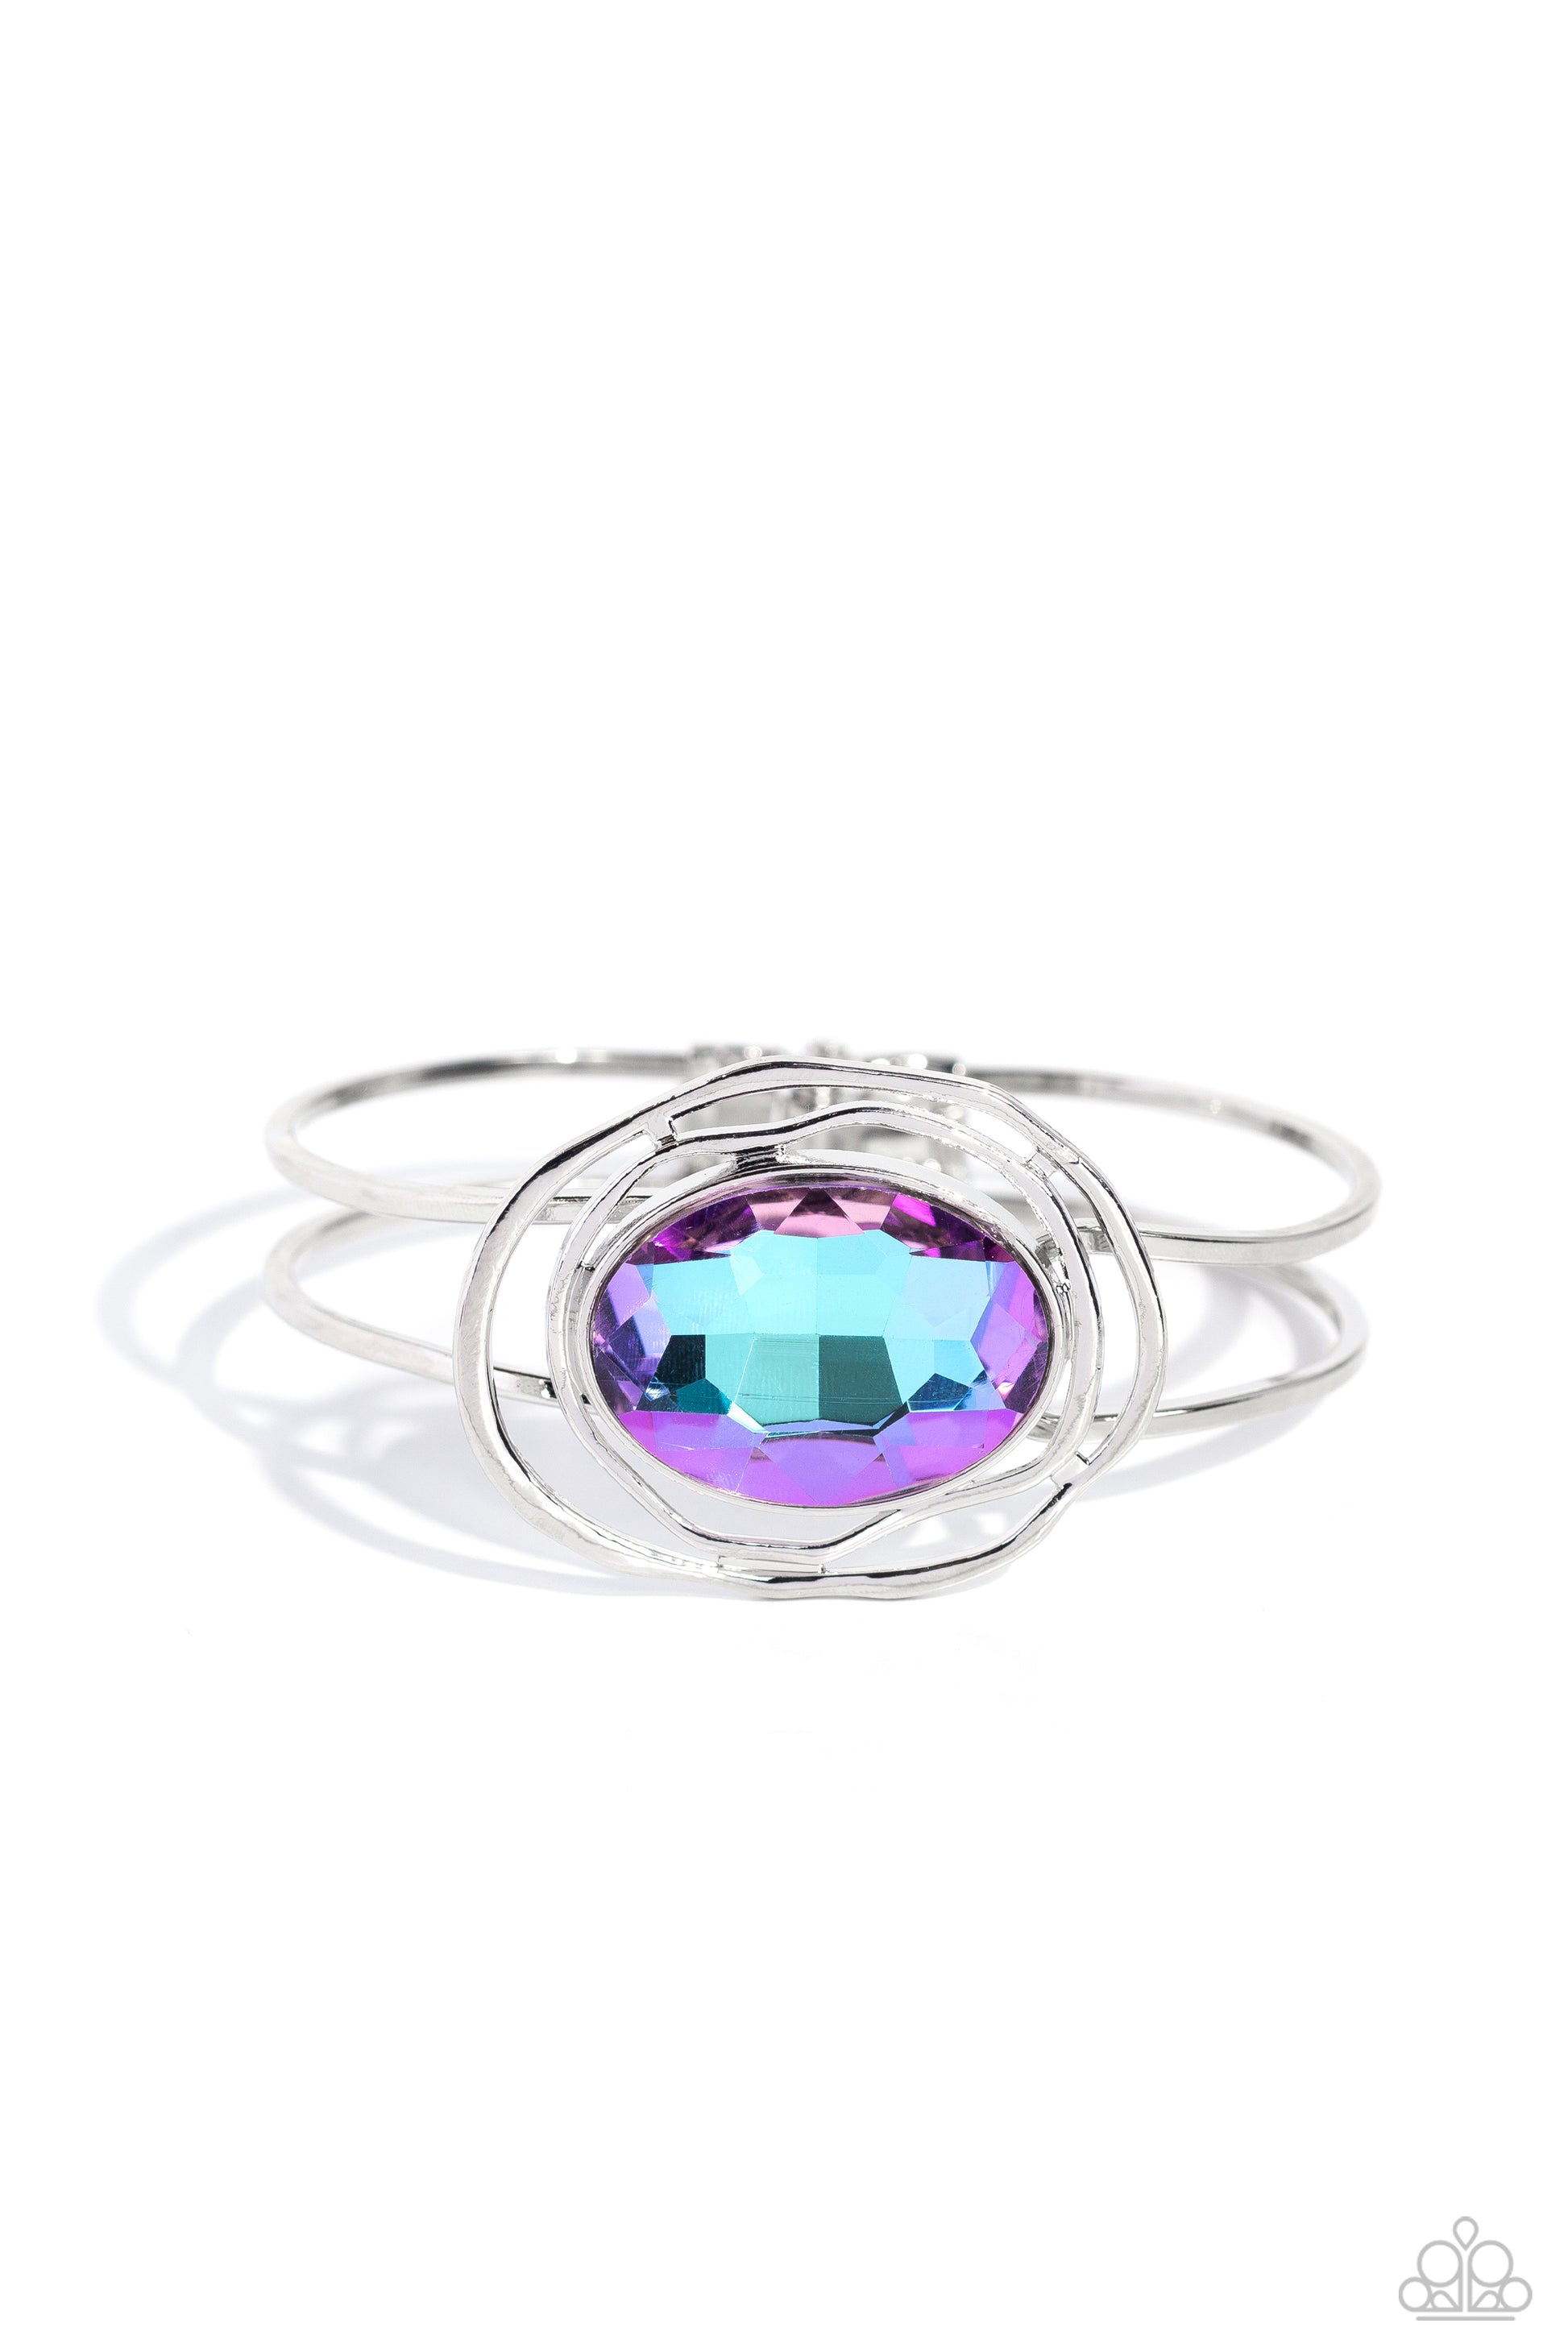 Paparazzi Accessories Substantial Sorceress - Purple Featured in the center of airy, shiny silver bands, an oversized, faceted purple oval gem rests atop the wrist for a dazzling pop of color. Warped, shiny silver rings seemingly float around the sparkly